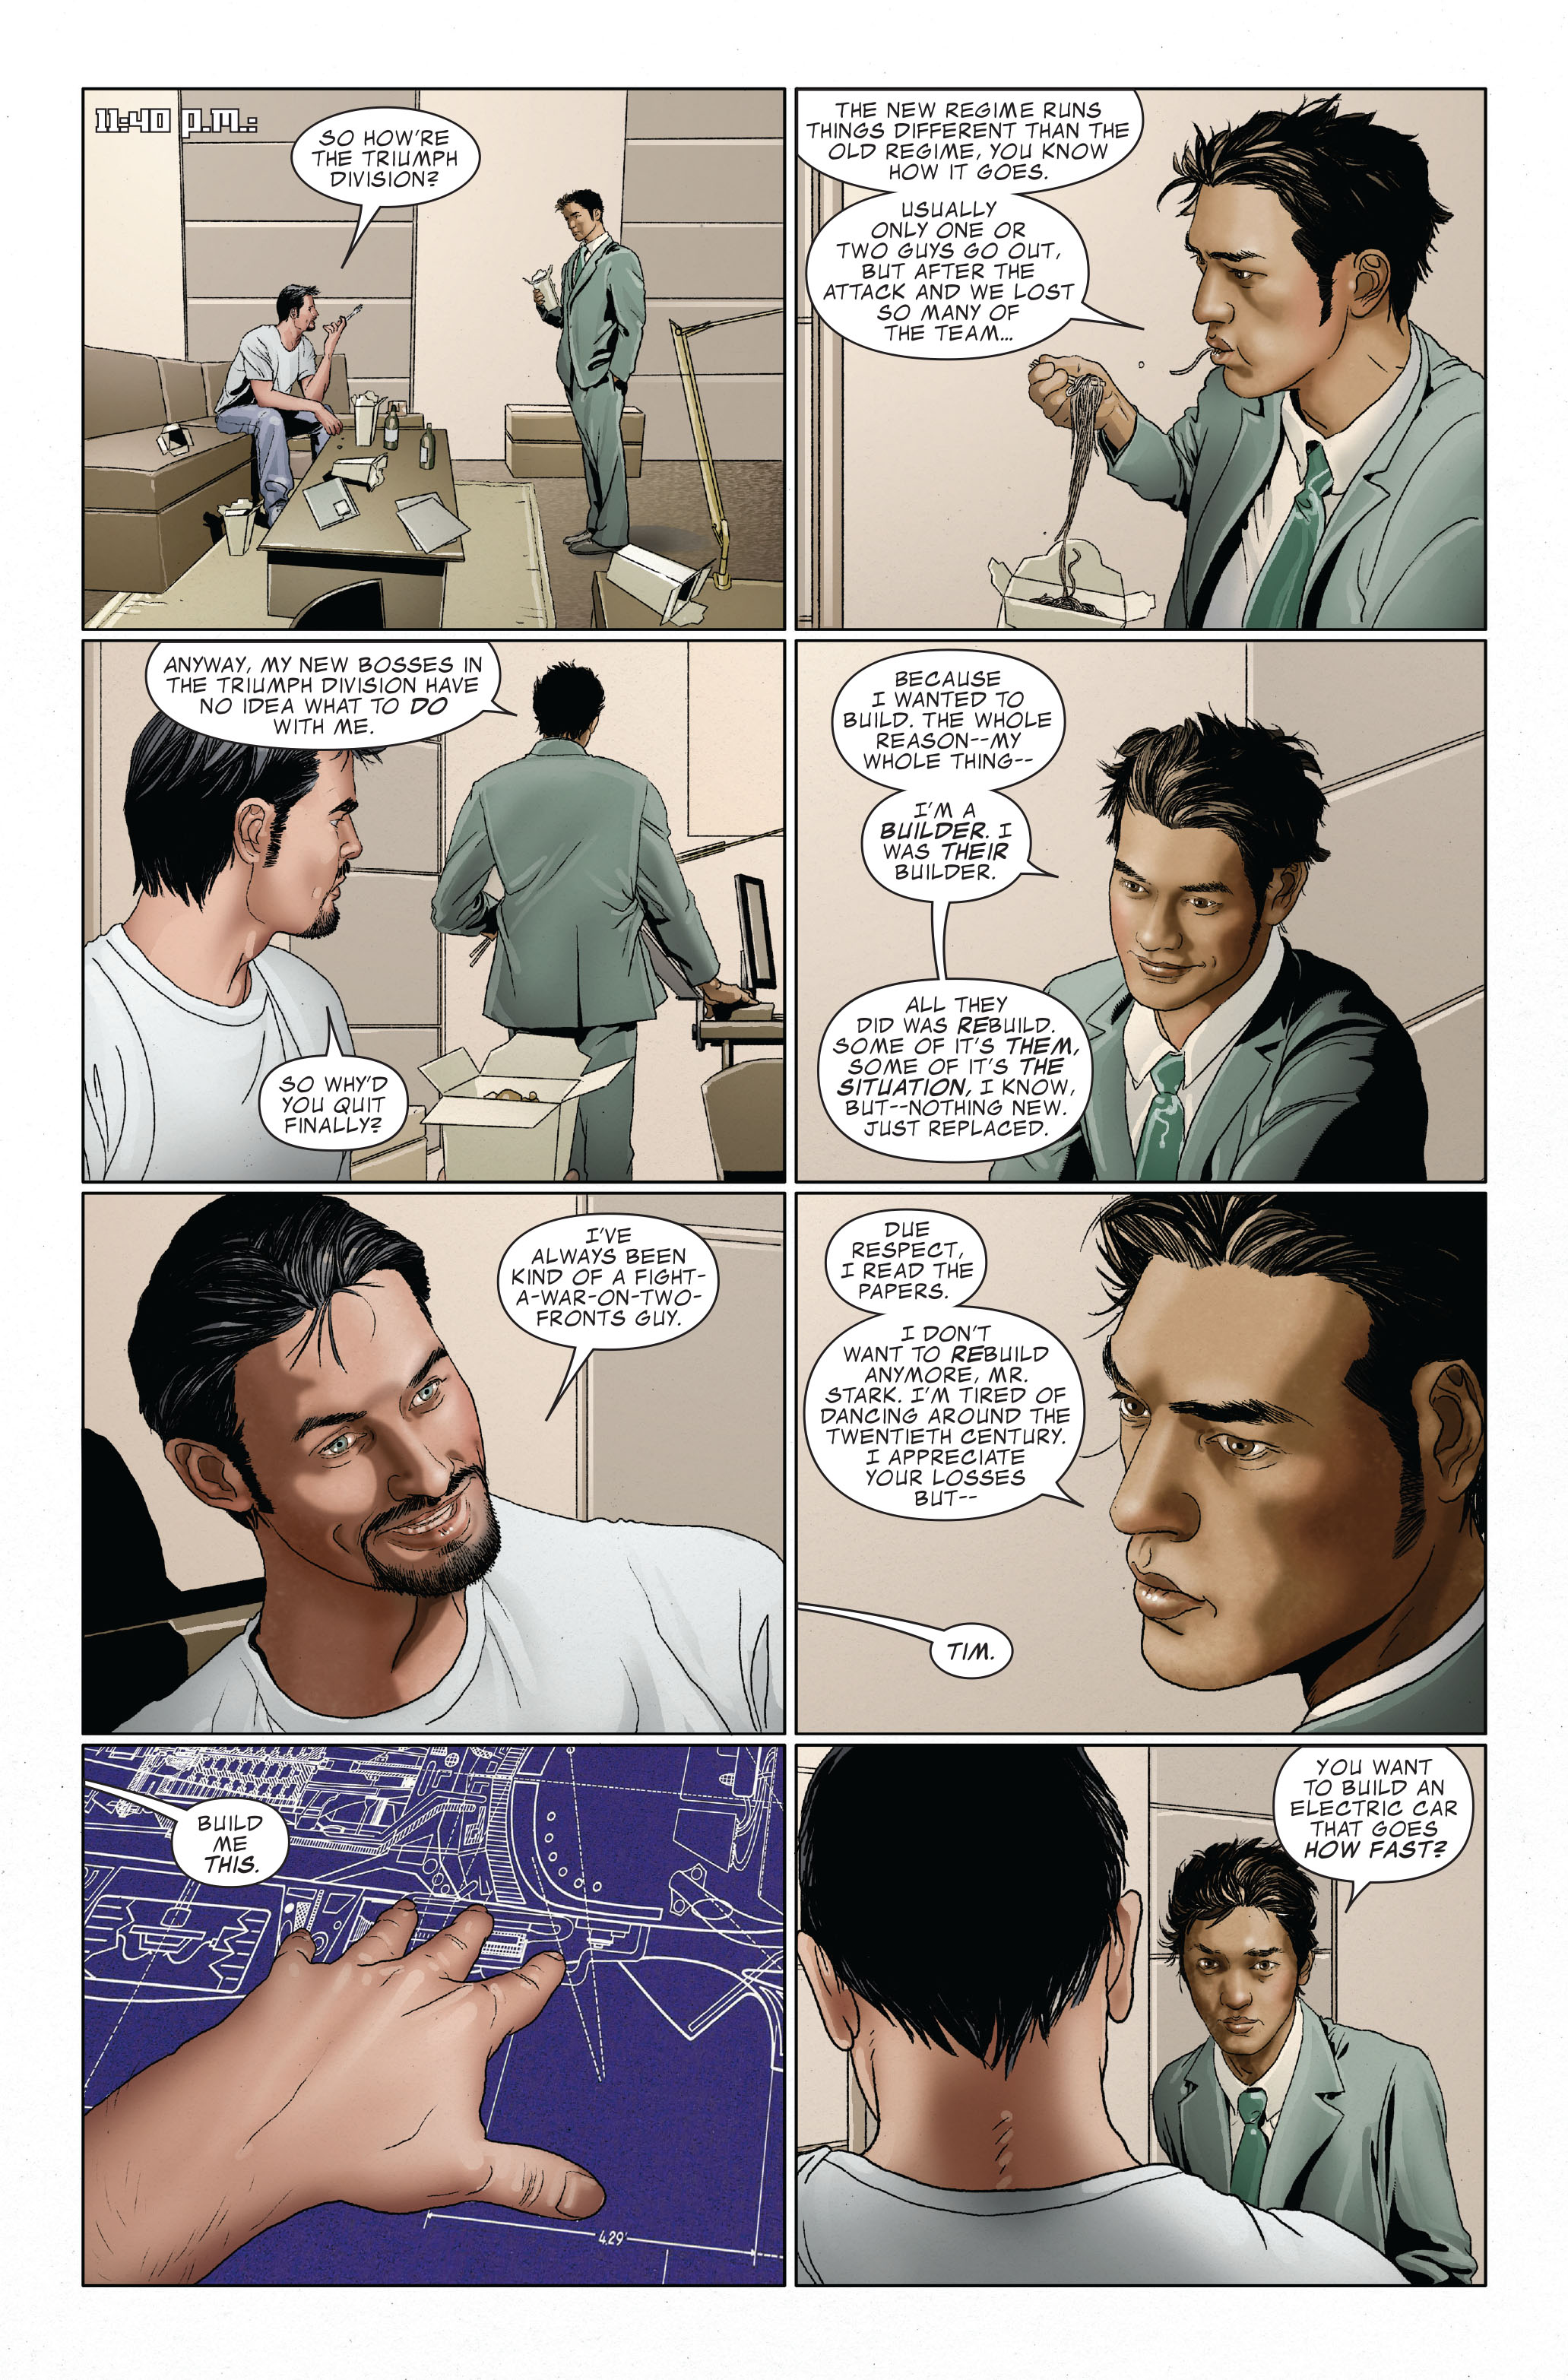 Invincible Iron Man (2008) 28 Page 18